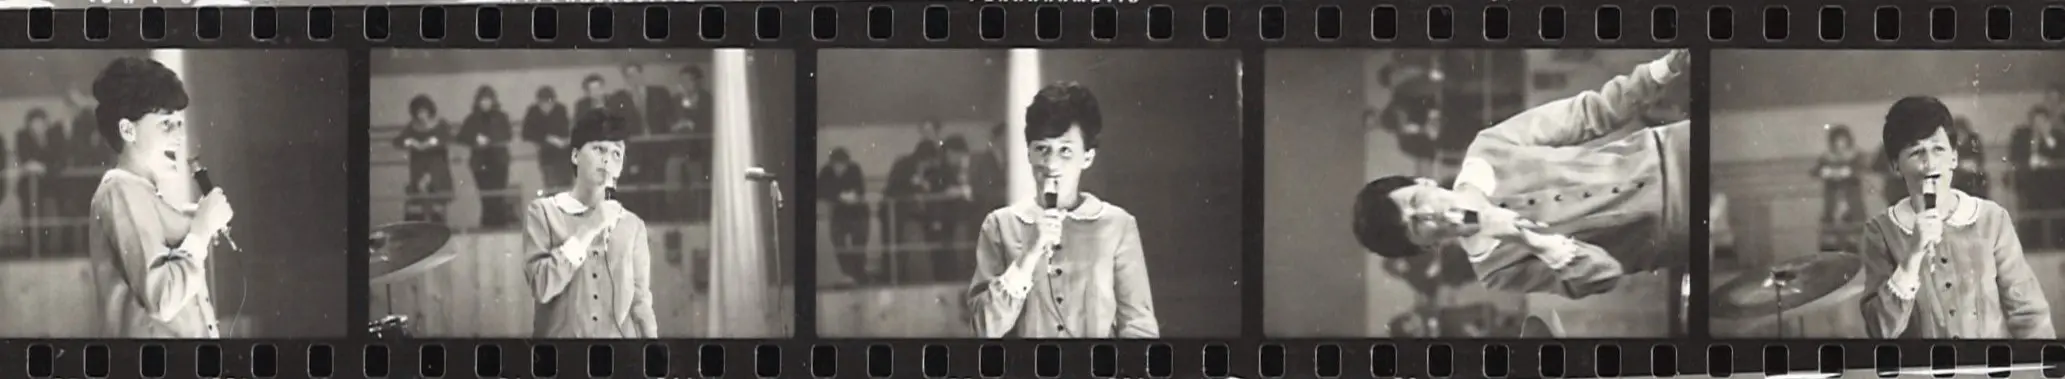 Photo negatives of a woman singing. 